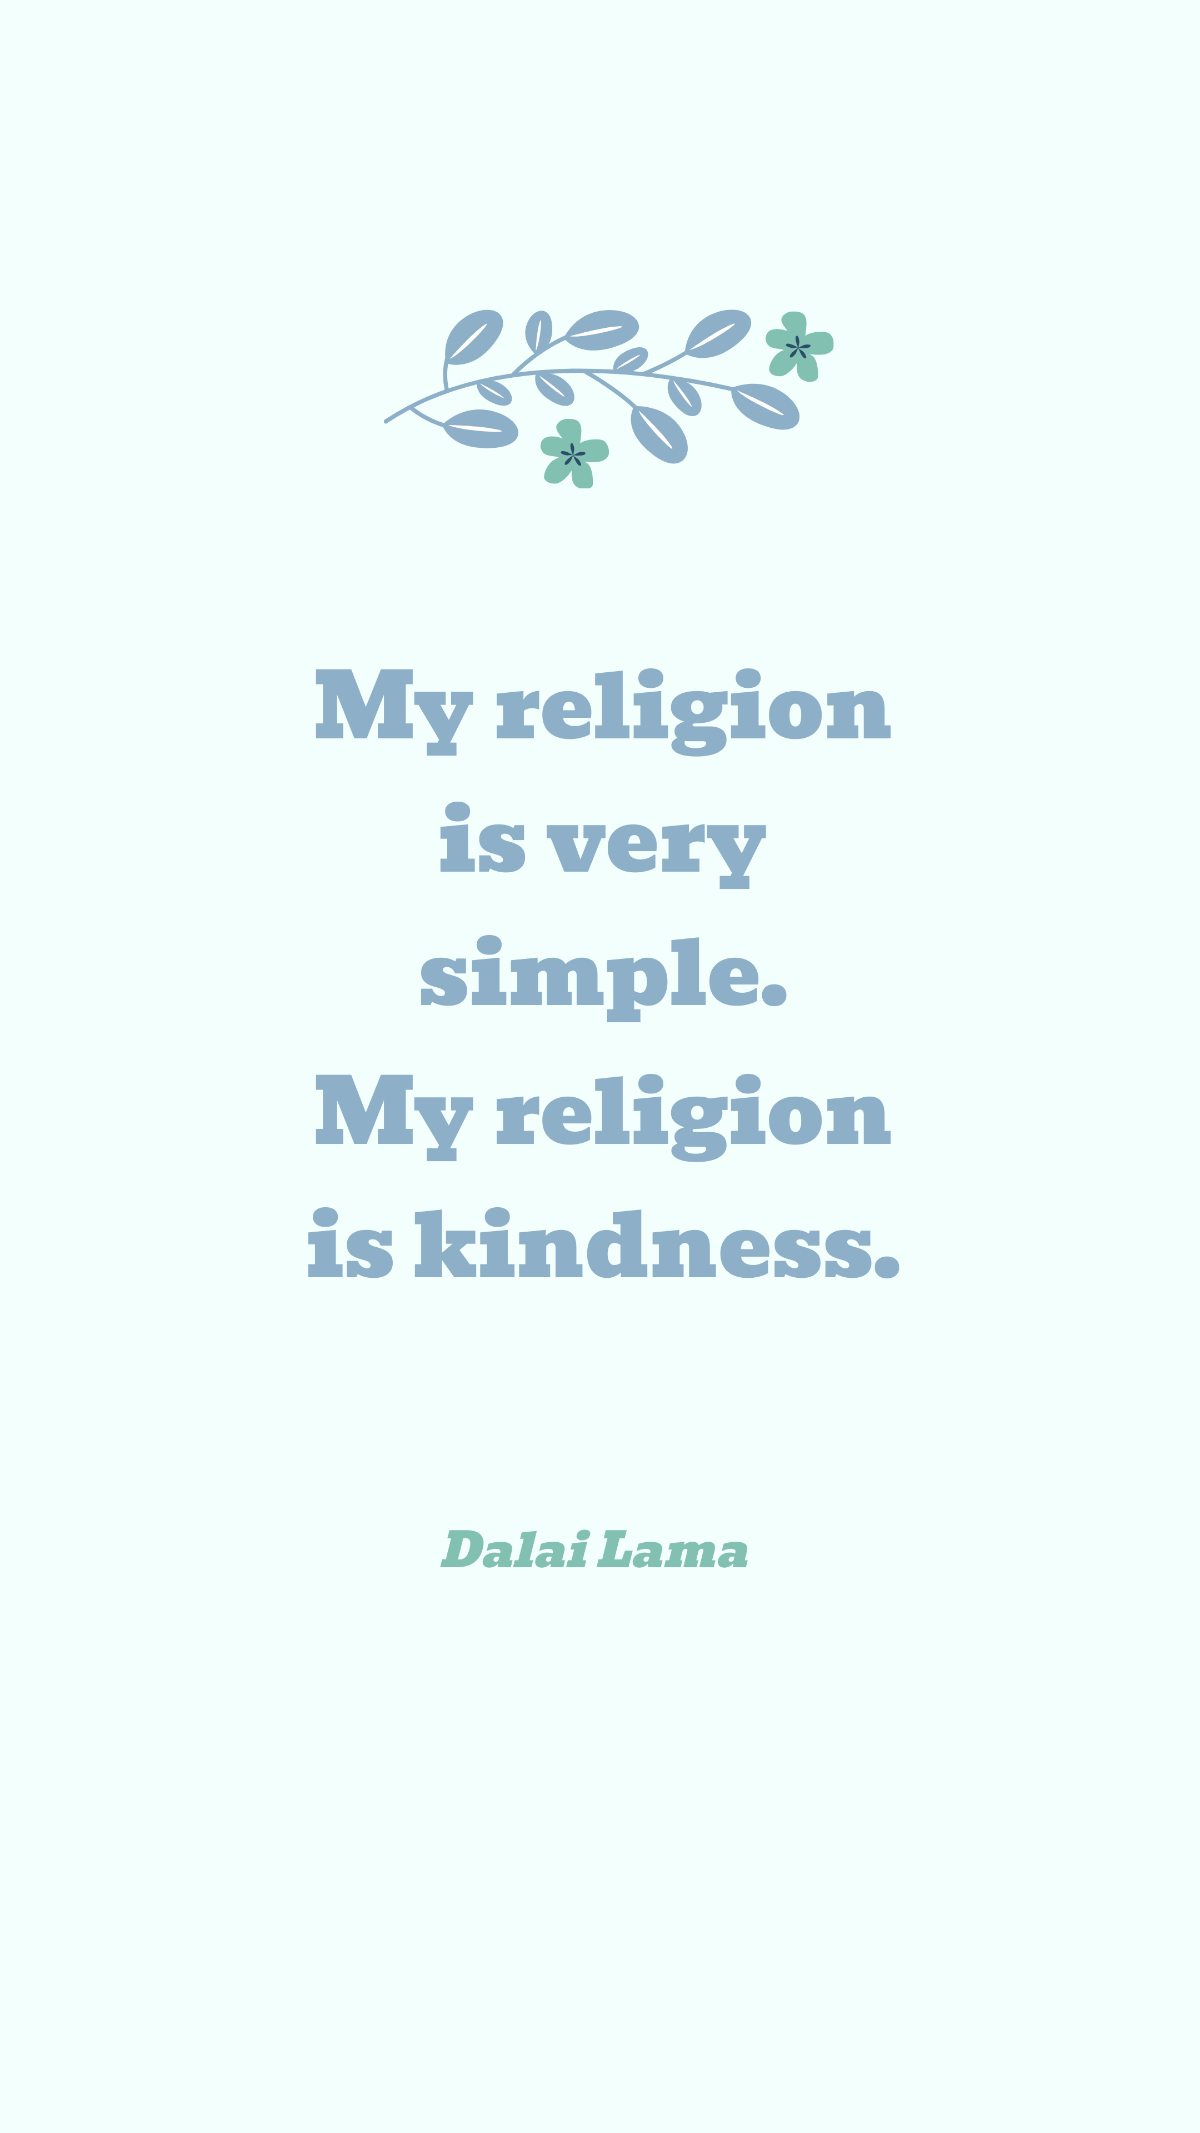 Dalai Lama - My religion is very simple. My religion is kindness. Template